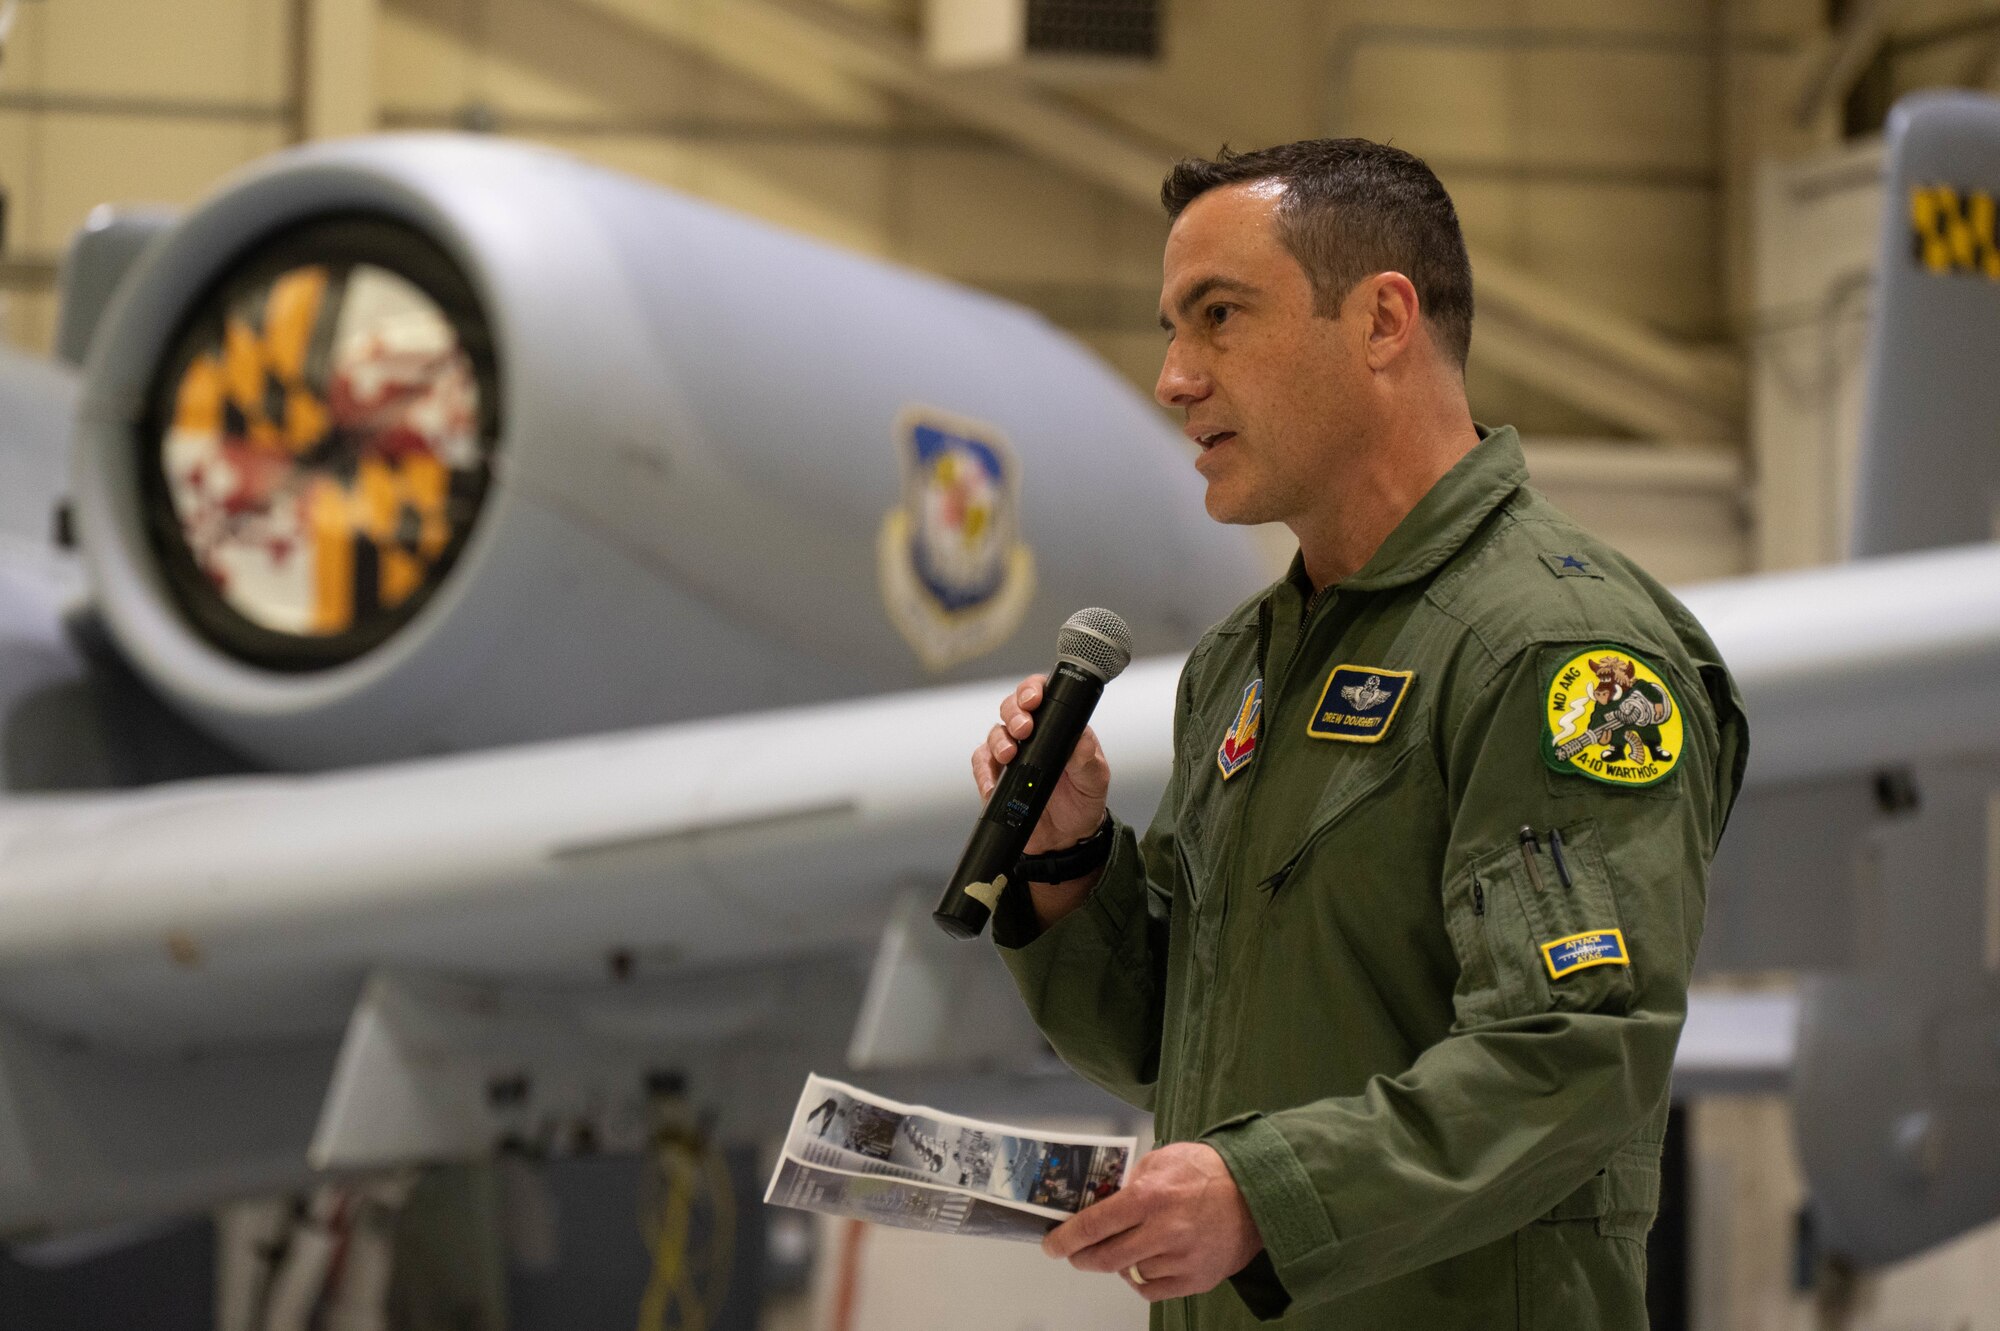 U.S. Air Force Brig. Gen. Drew E. Dougherty, assistant adjutant general for Air, outlines key initiatives for the Maryland Air National Guard during a civic engagement at Martin State Air National Guard Base, Middle River, Maryland, March 31, 2023.